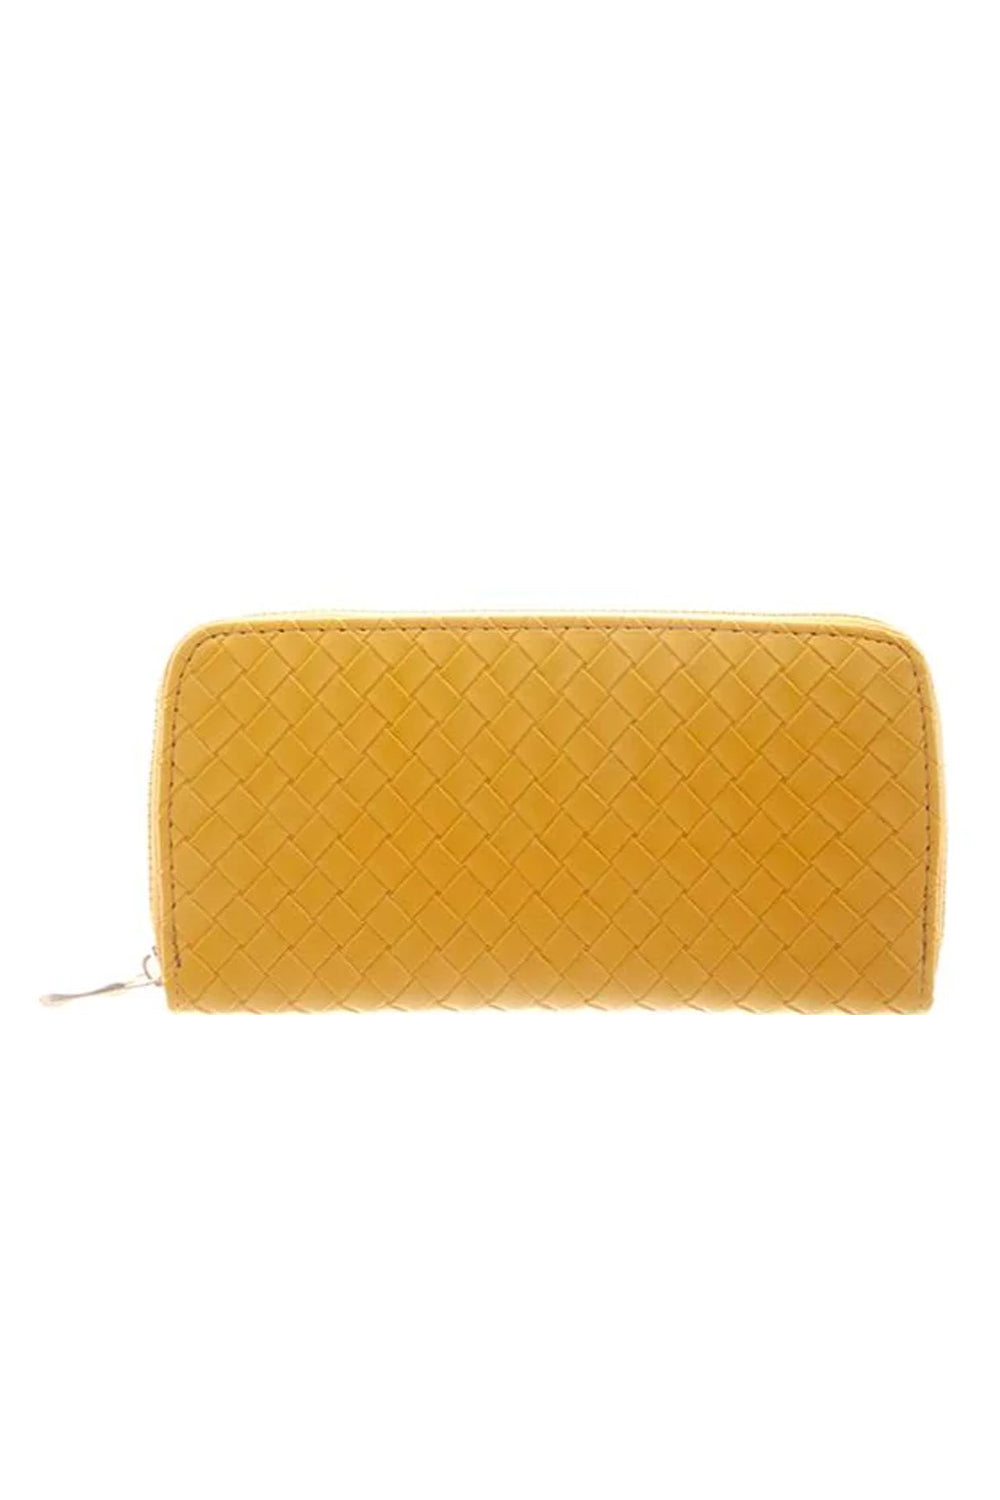 Fashion Smooth Leather Design Women's Wallet